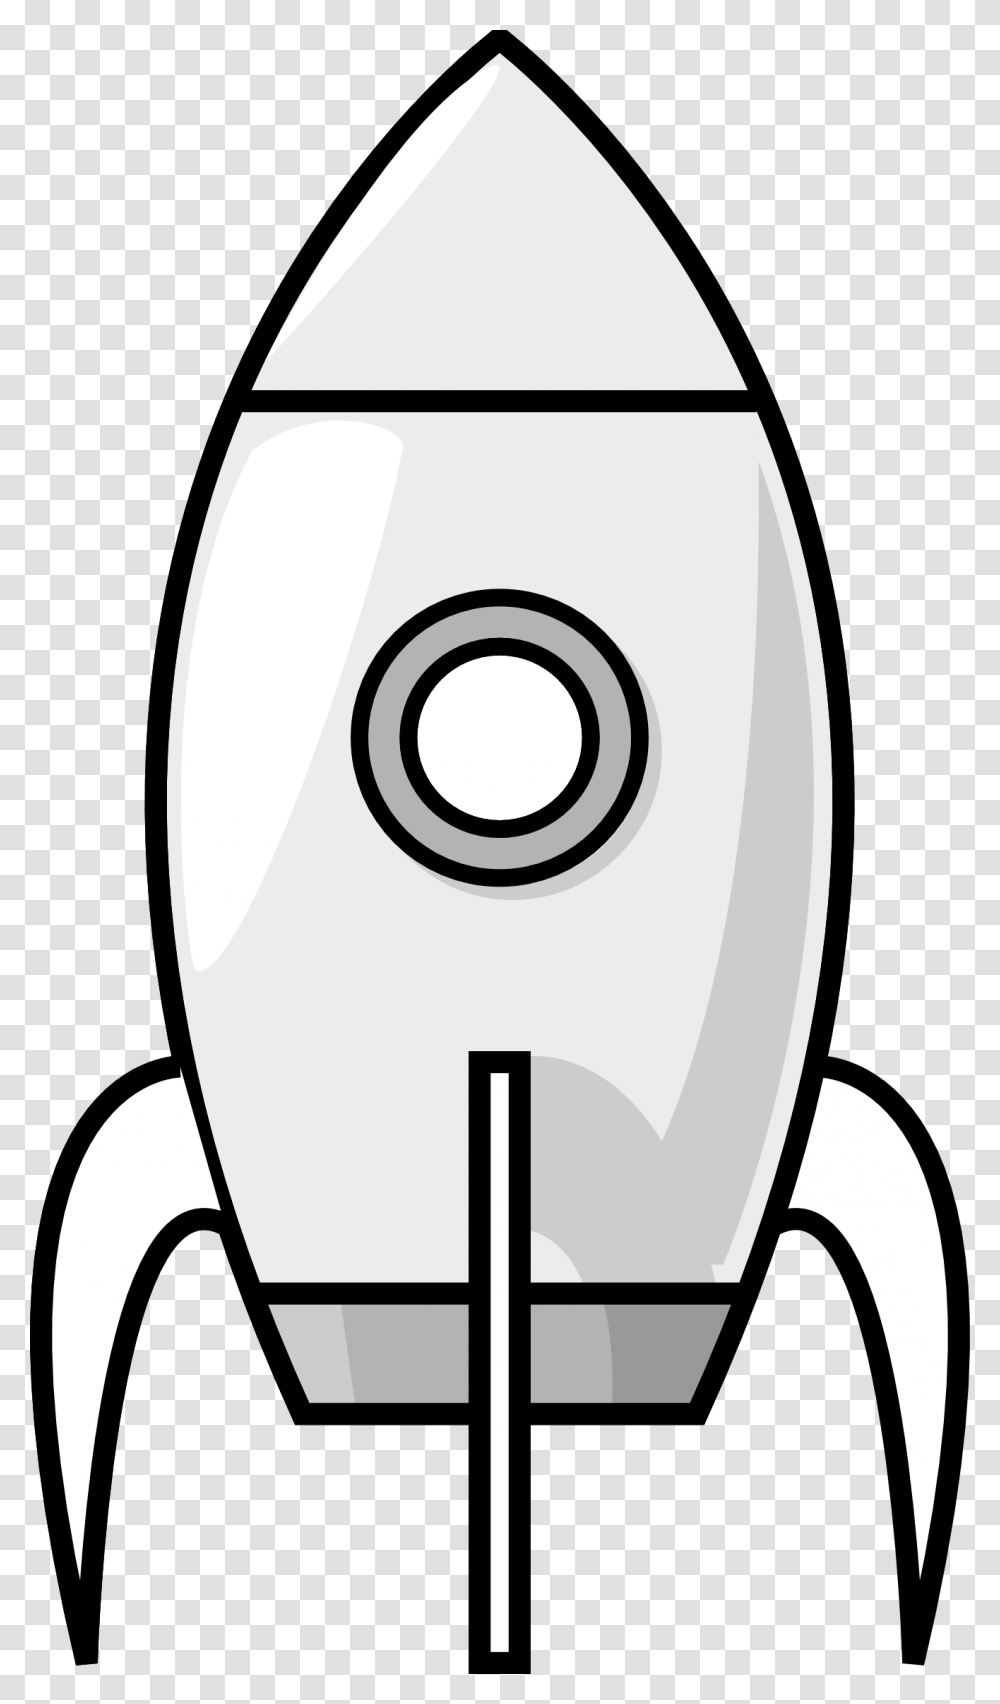 Use With The Straw Rocket Pin Cartoon Rocket Coloring Book, Machine, Appliance, Glass, Steamer Transparent Png